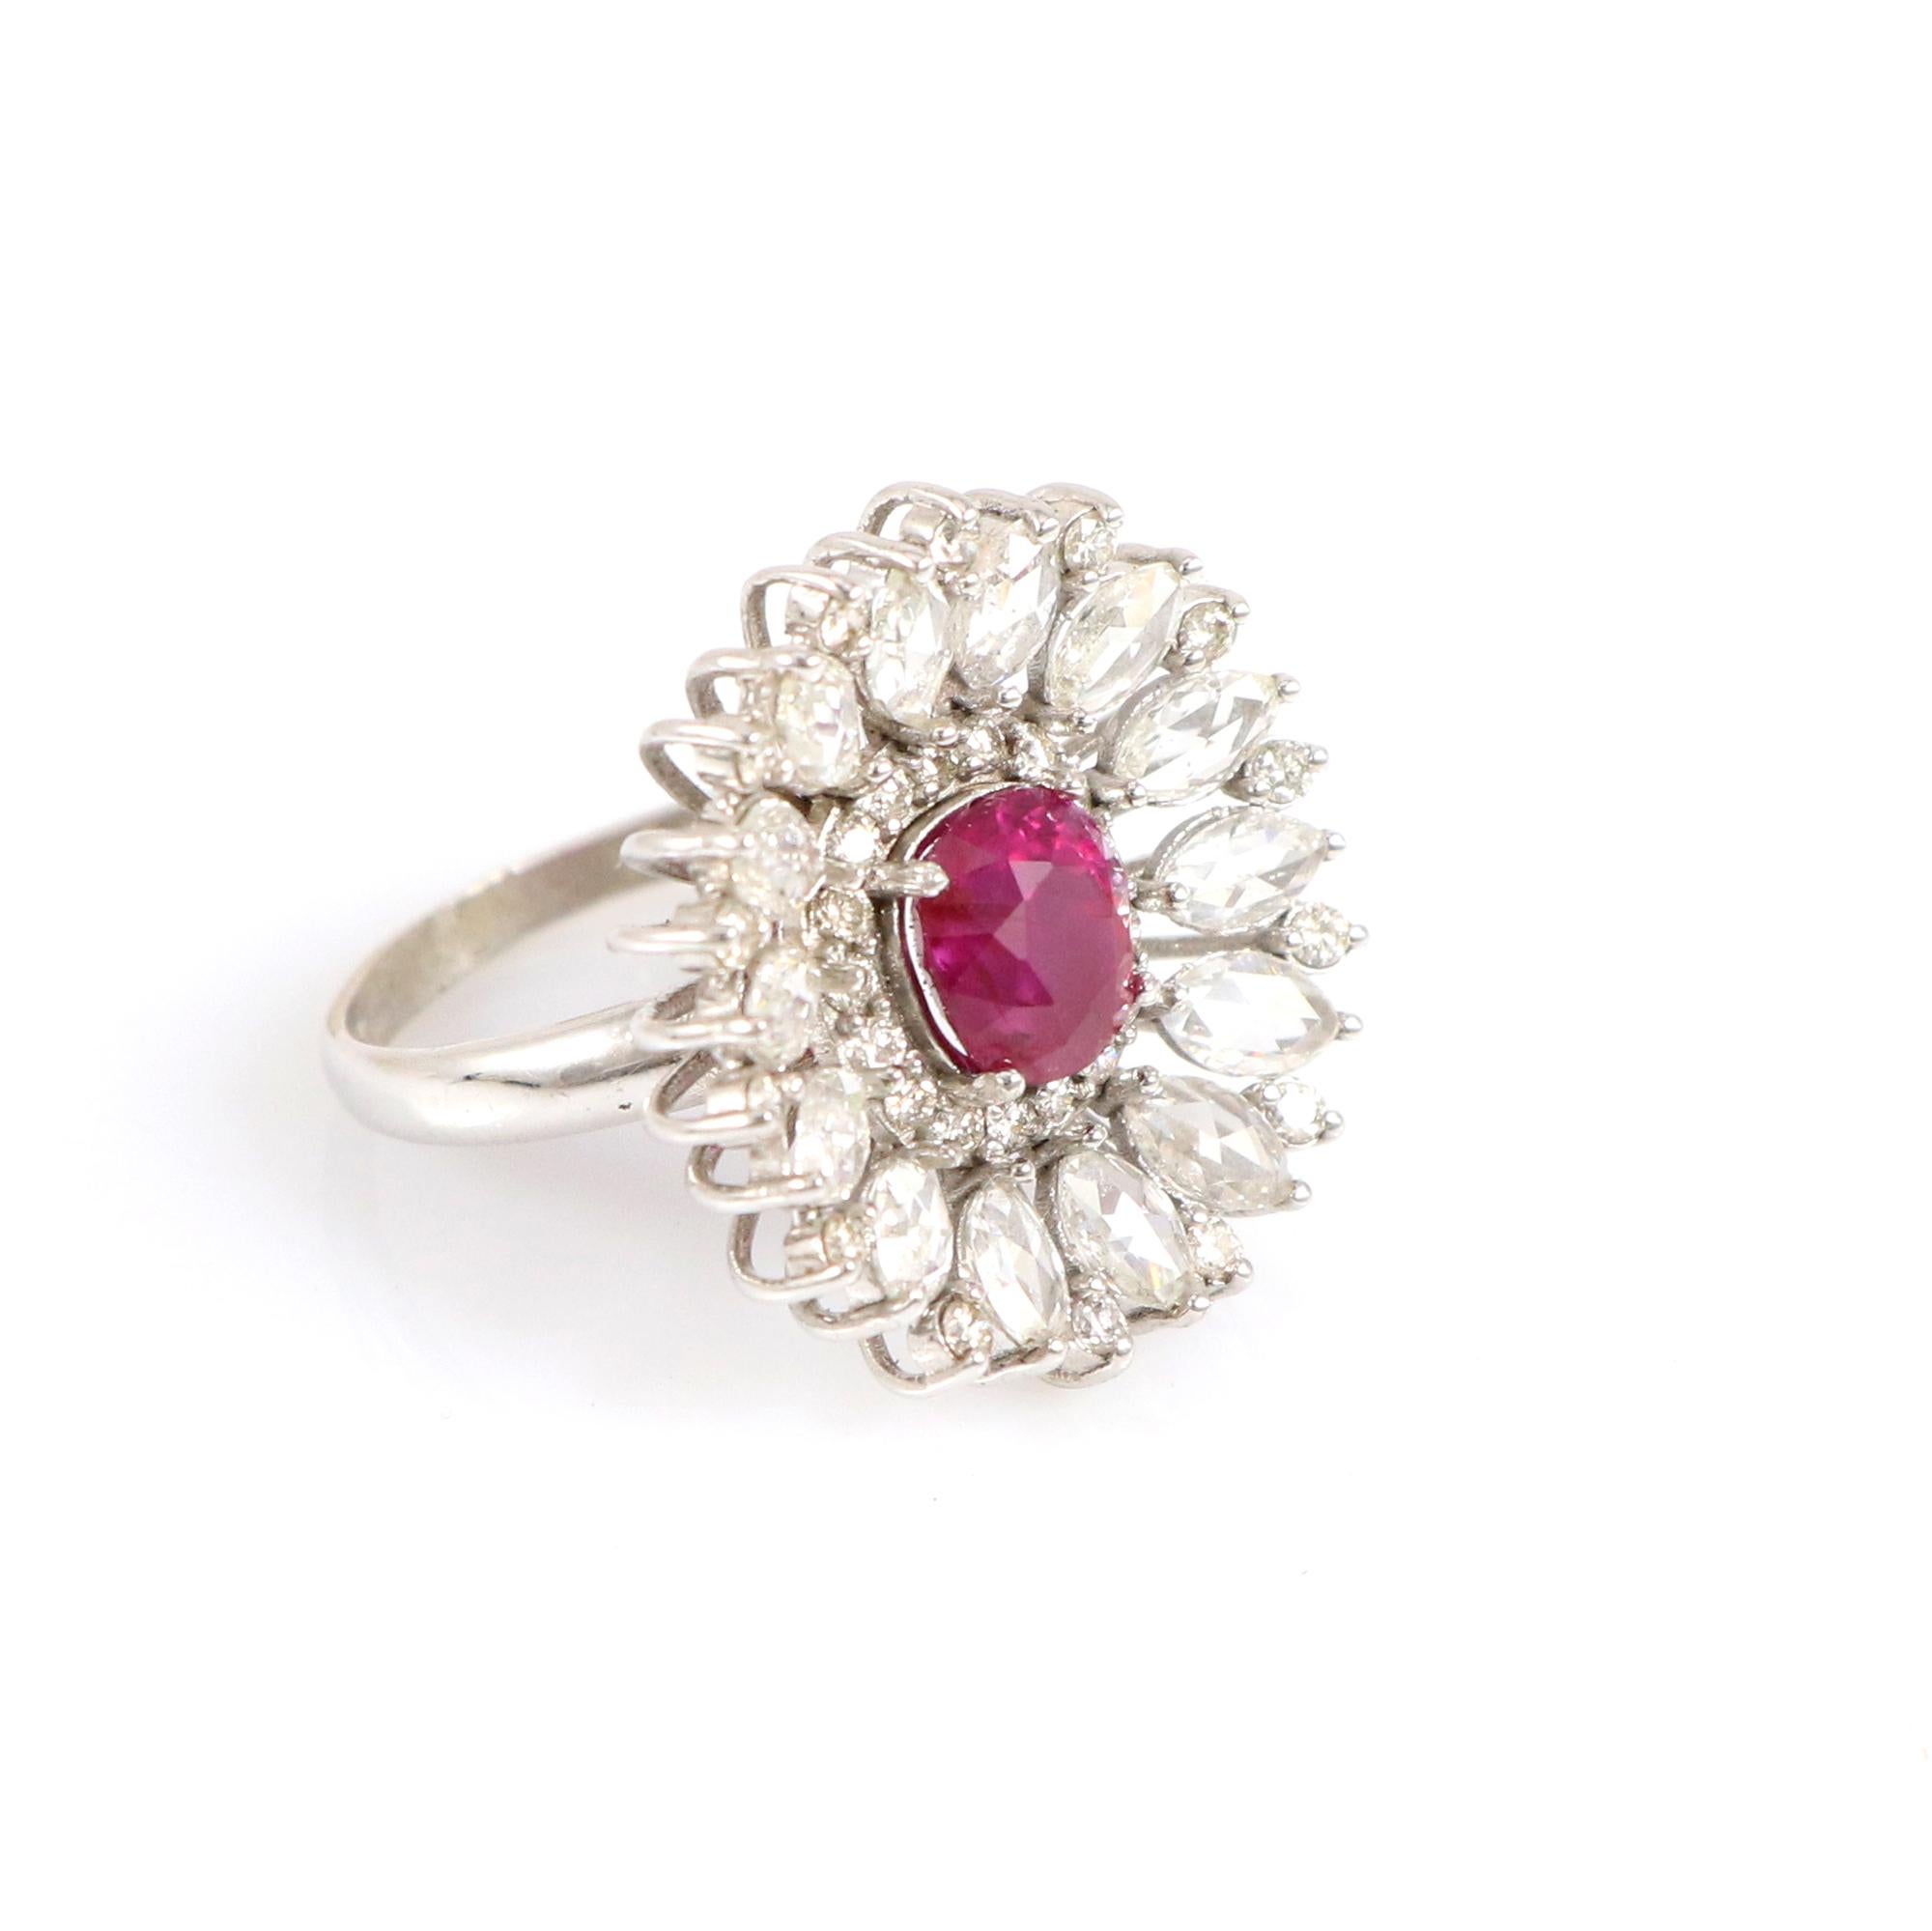 Experience the epitome of elegance with our exceptional gold ring adorned with natural Burma ruby and marquise-shaped rose-cut diamonds. These rare gemstones are celebrated for their intense red brilliance, beautifully complemented by subtle hints